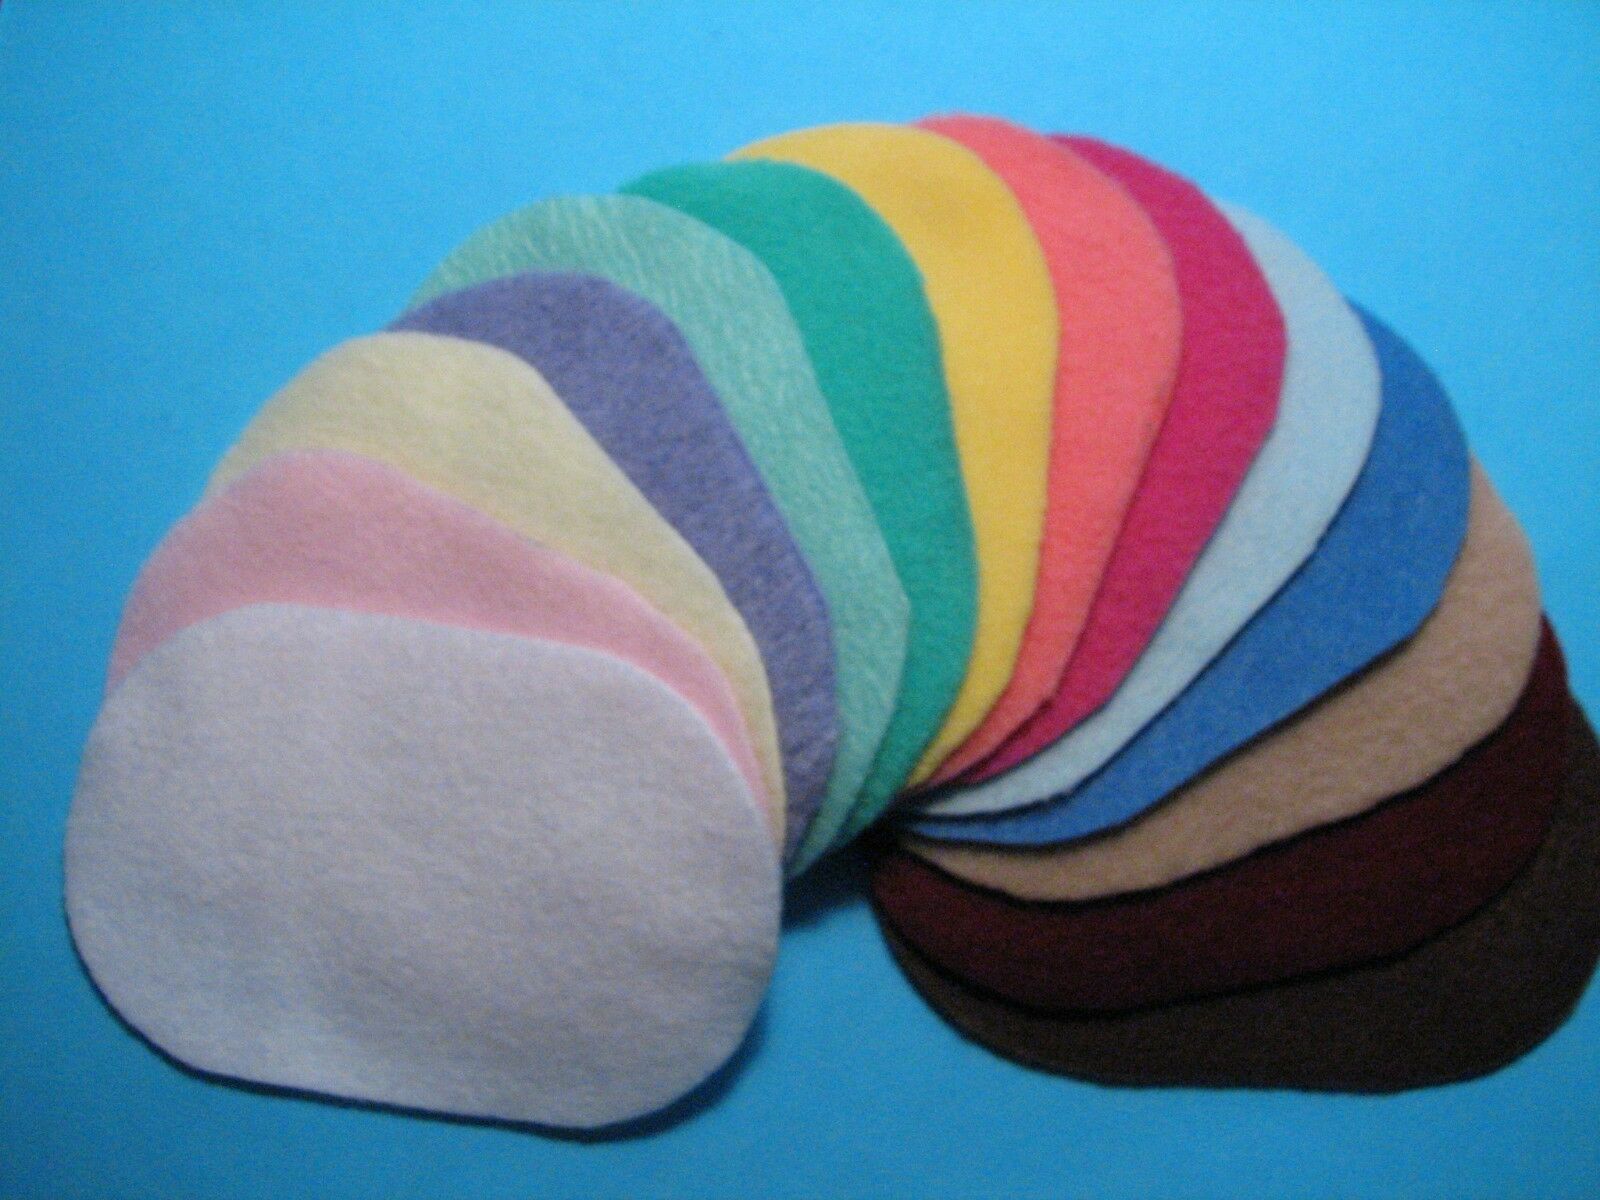 Dollhouse Miniature Wholesale Lot Of 12 Oval Fuzzy Rugs Asstd. Colors